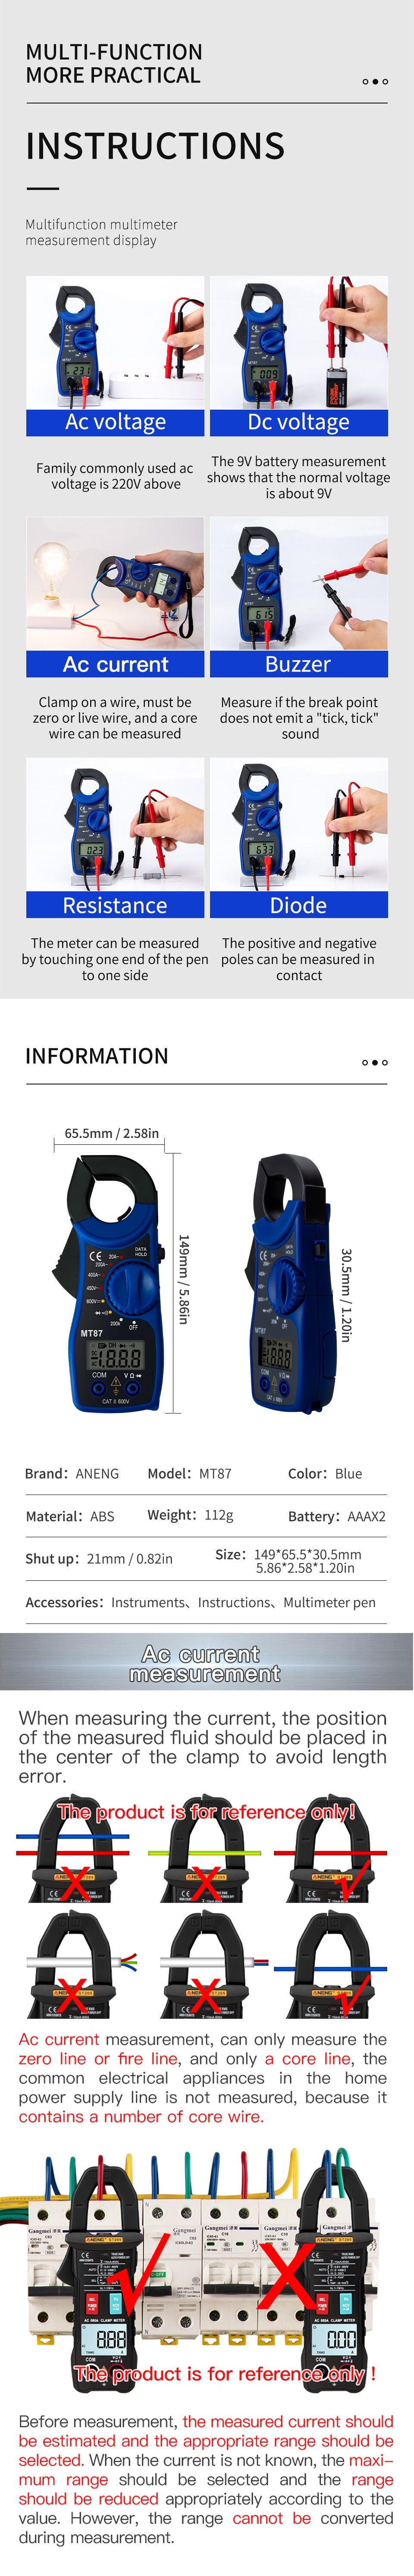 ANENG-MT87-Portable-Digital-Clamp-Ammeter-Multimeter-With-ACDC-Voltage-Tester-AC-Current-Resistance--1605180